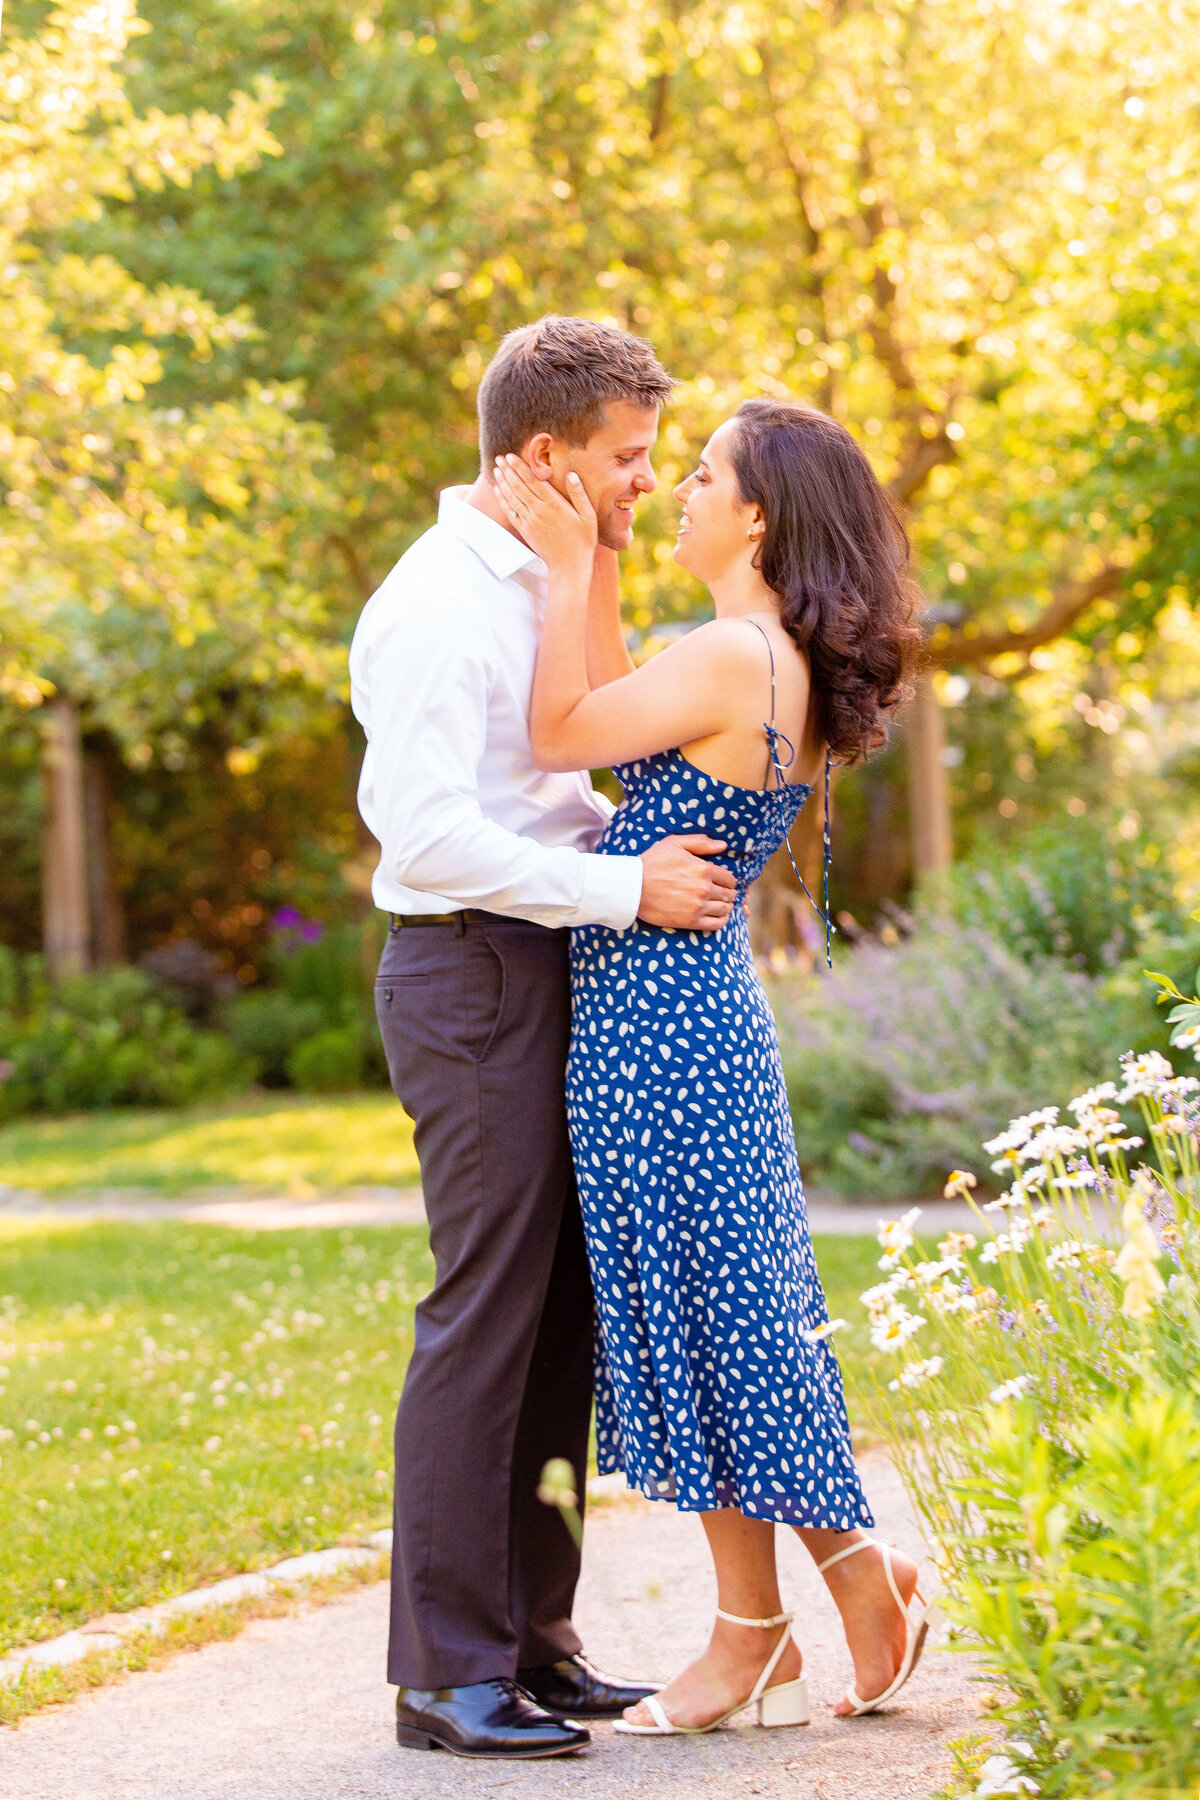 Man and woman laugh as they embrace during their engagement session.